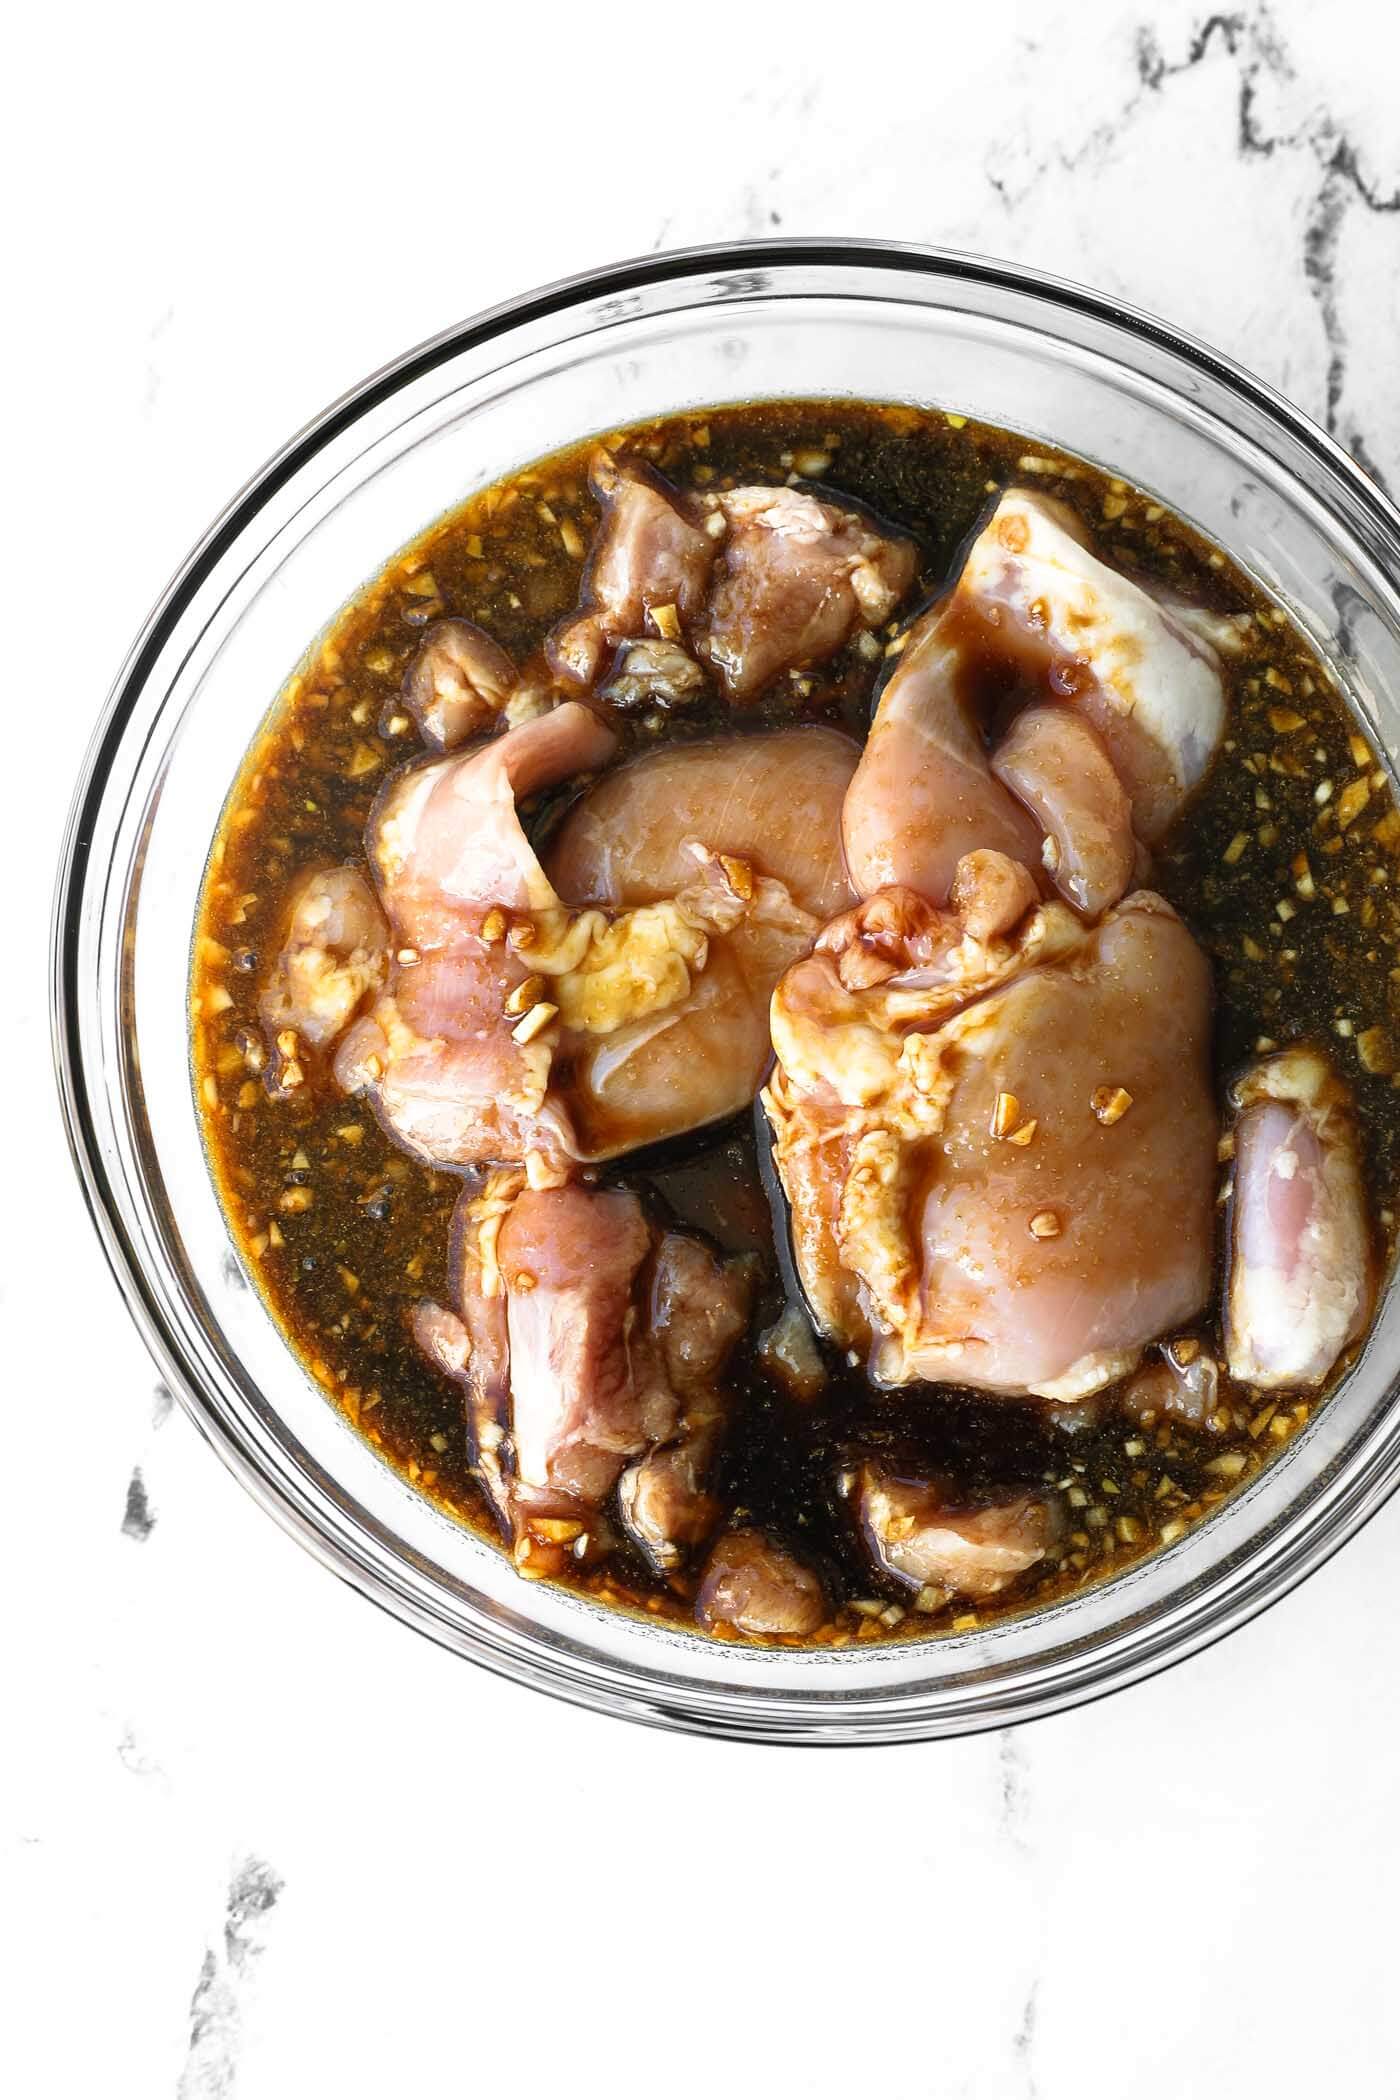 Raw chicken marinating in a bowl with honey garlic sauce.